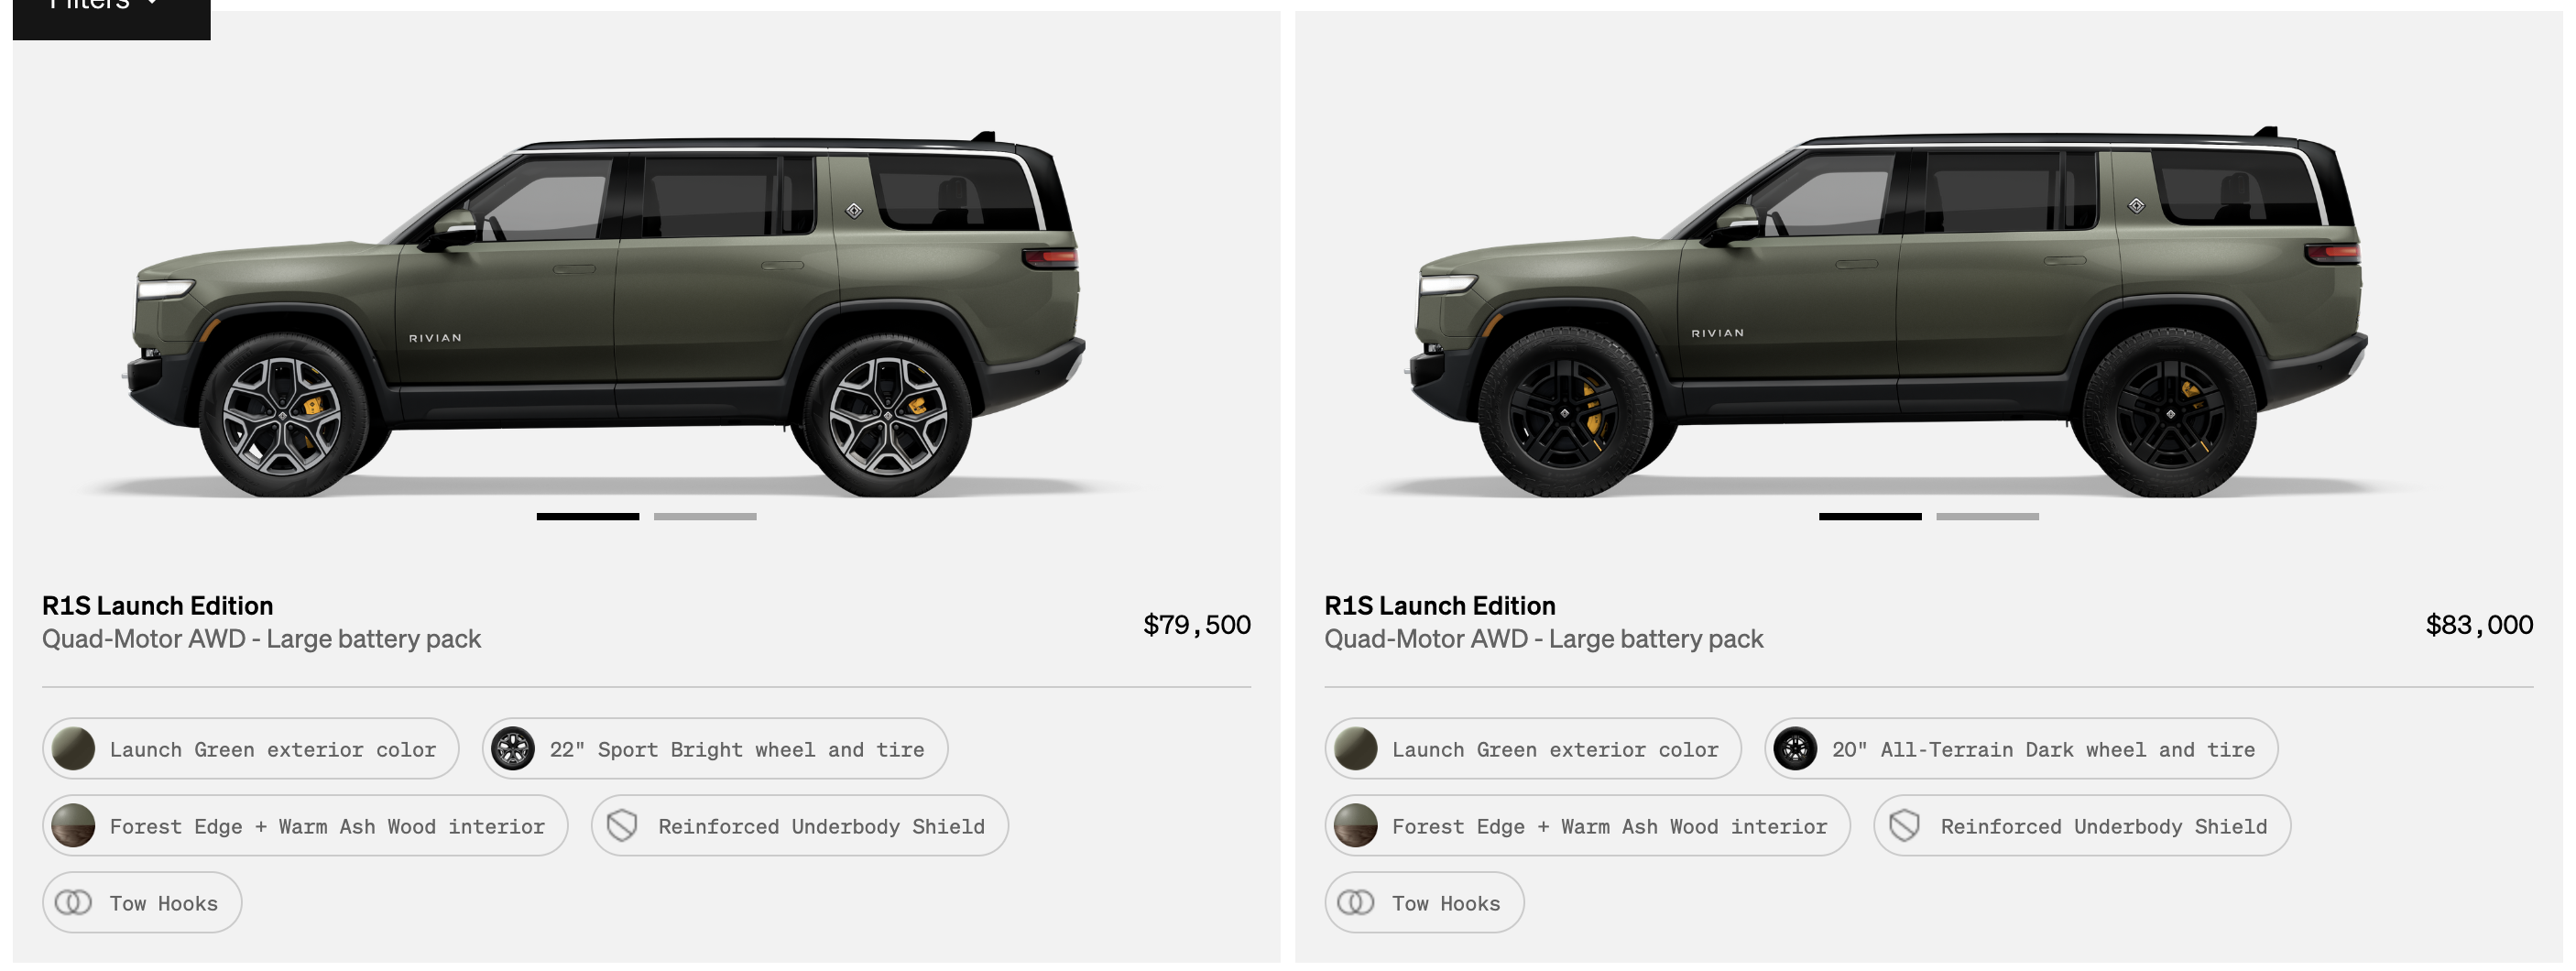 Rivian R1T R1S R1S Shop access live with lots of inventory! Screenshot 2023-01-27 at 6.54.11 PM